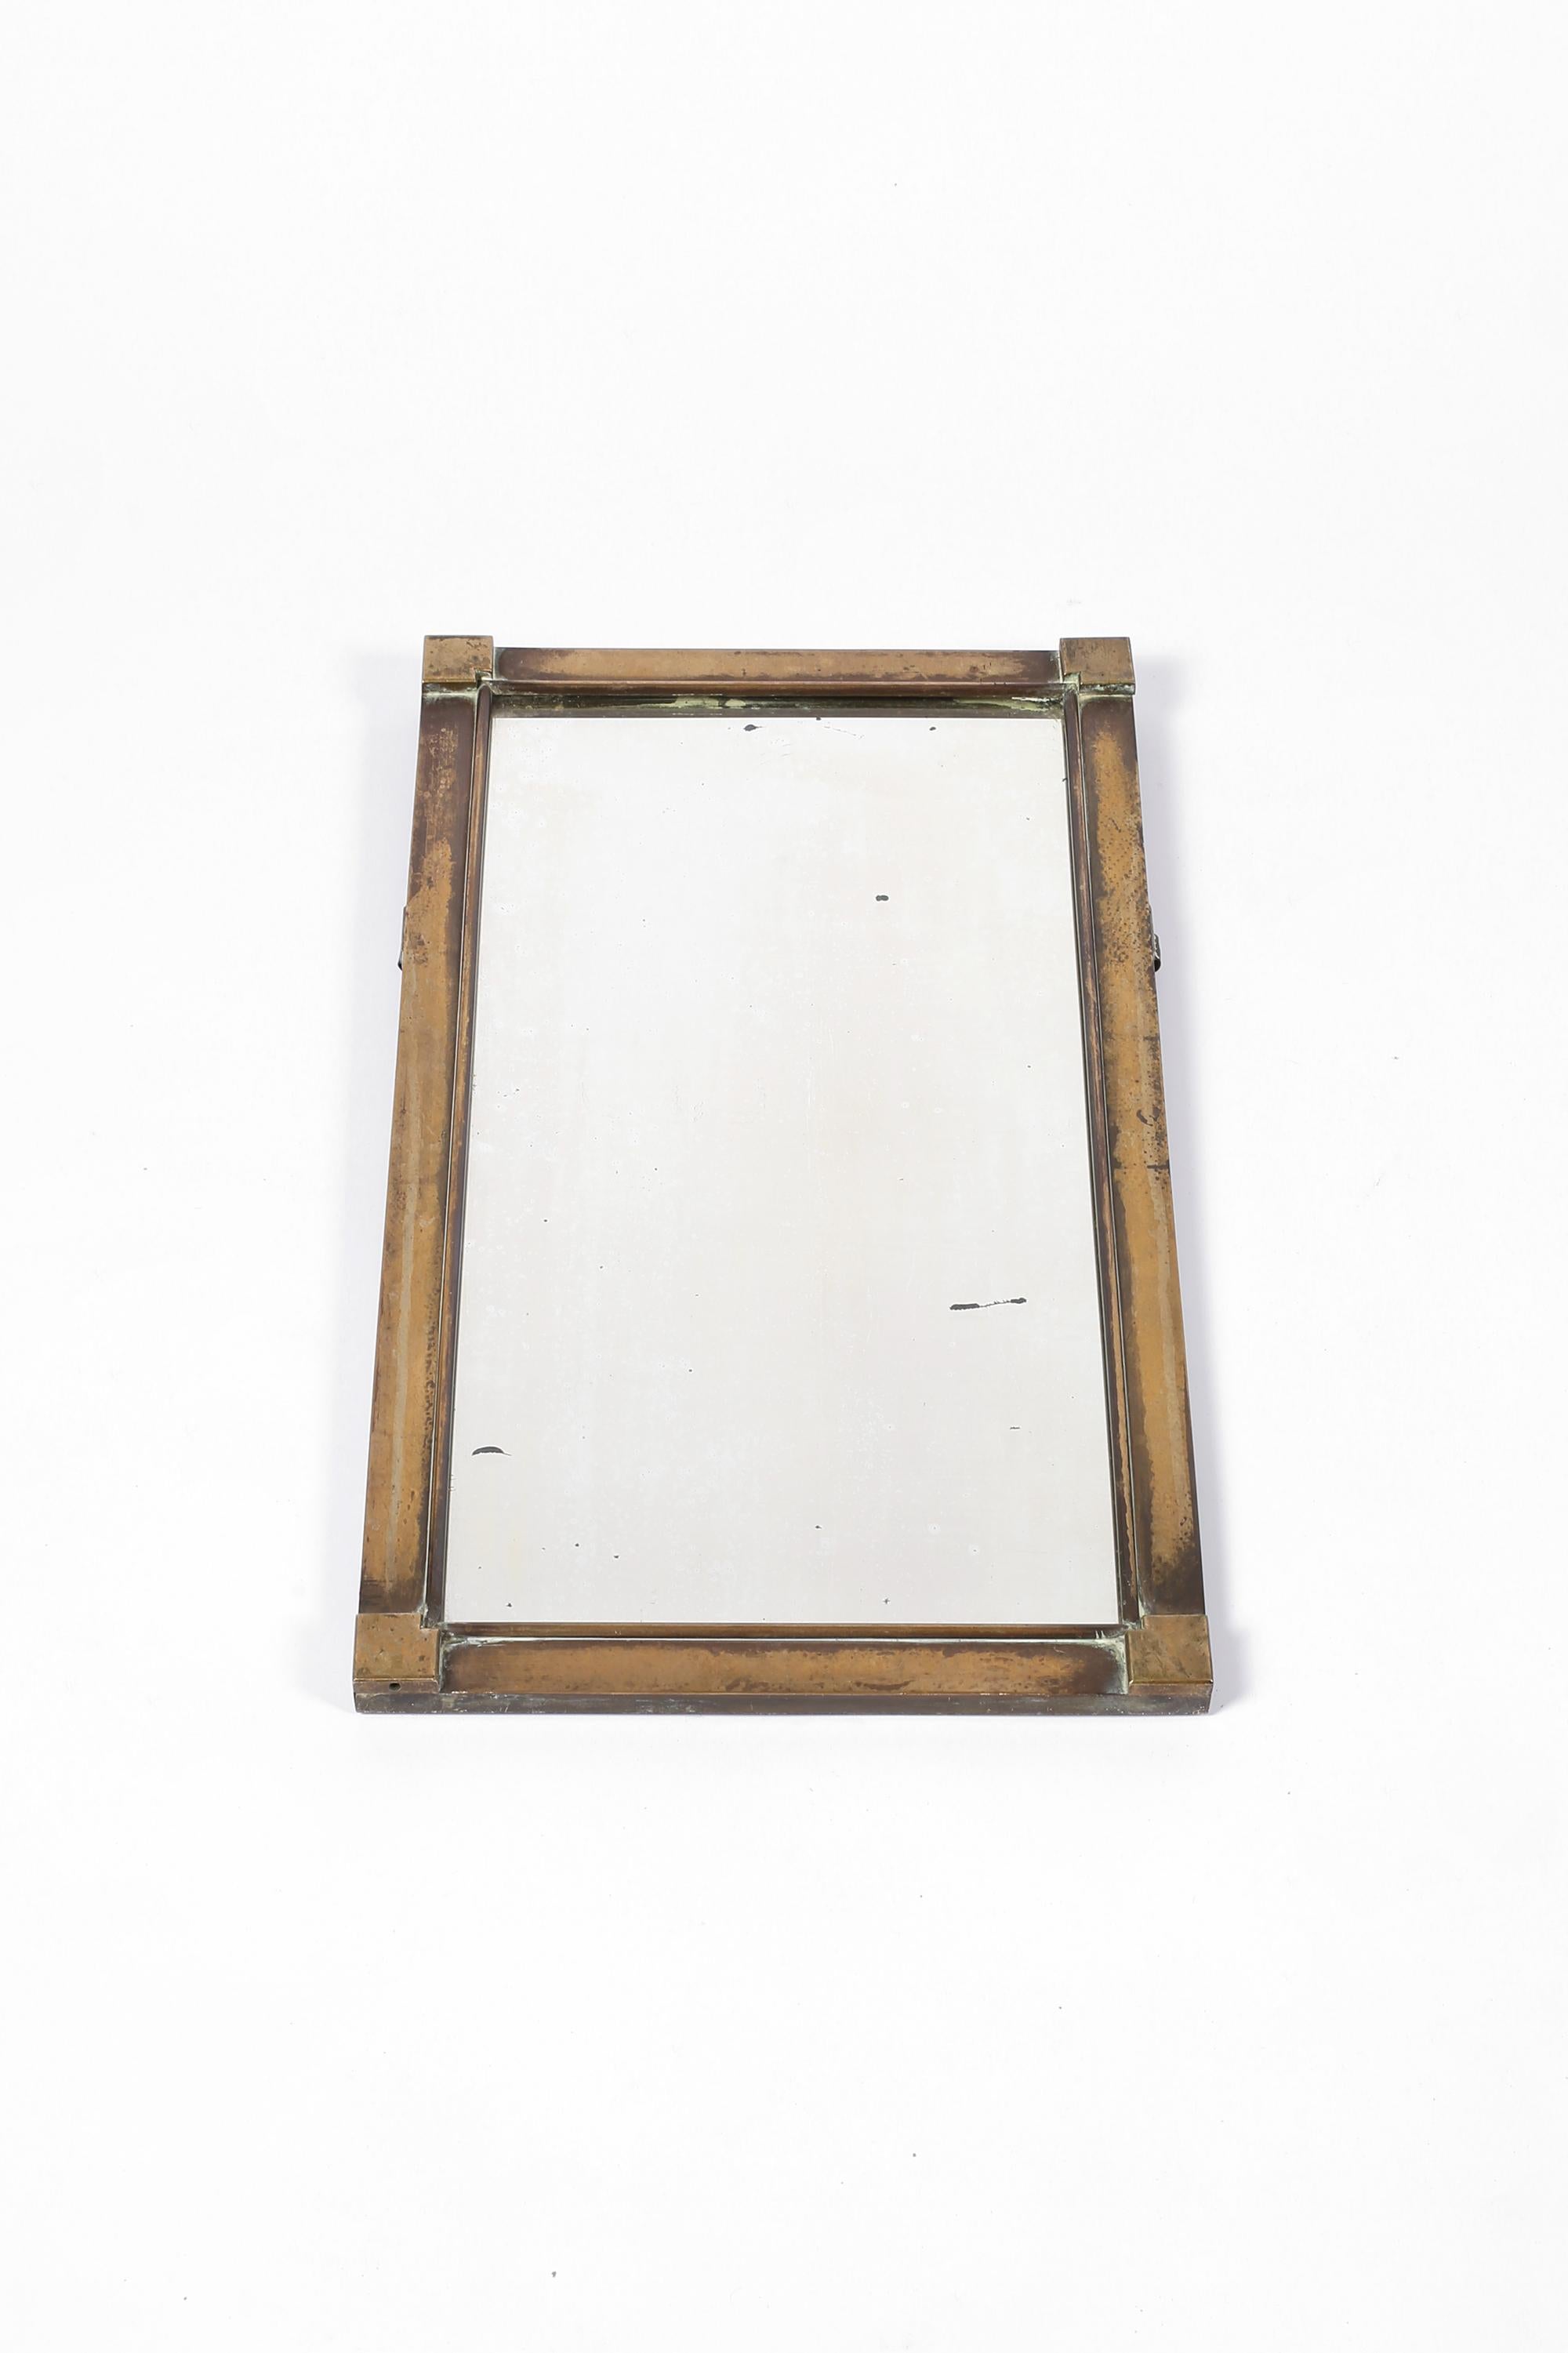 A patinated bronze wall mirror with cubist detailing to the frame. Original mirror plate with attractive subtle foxing and wear. French, c. 1920.